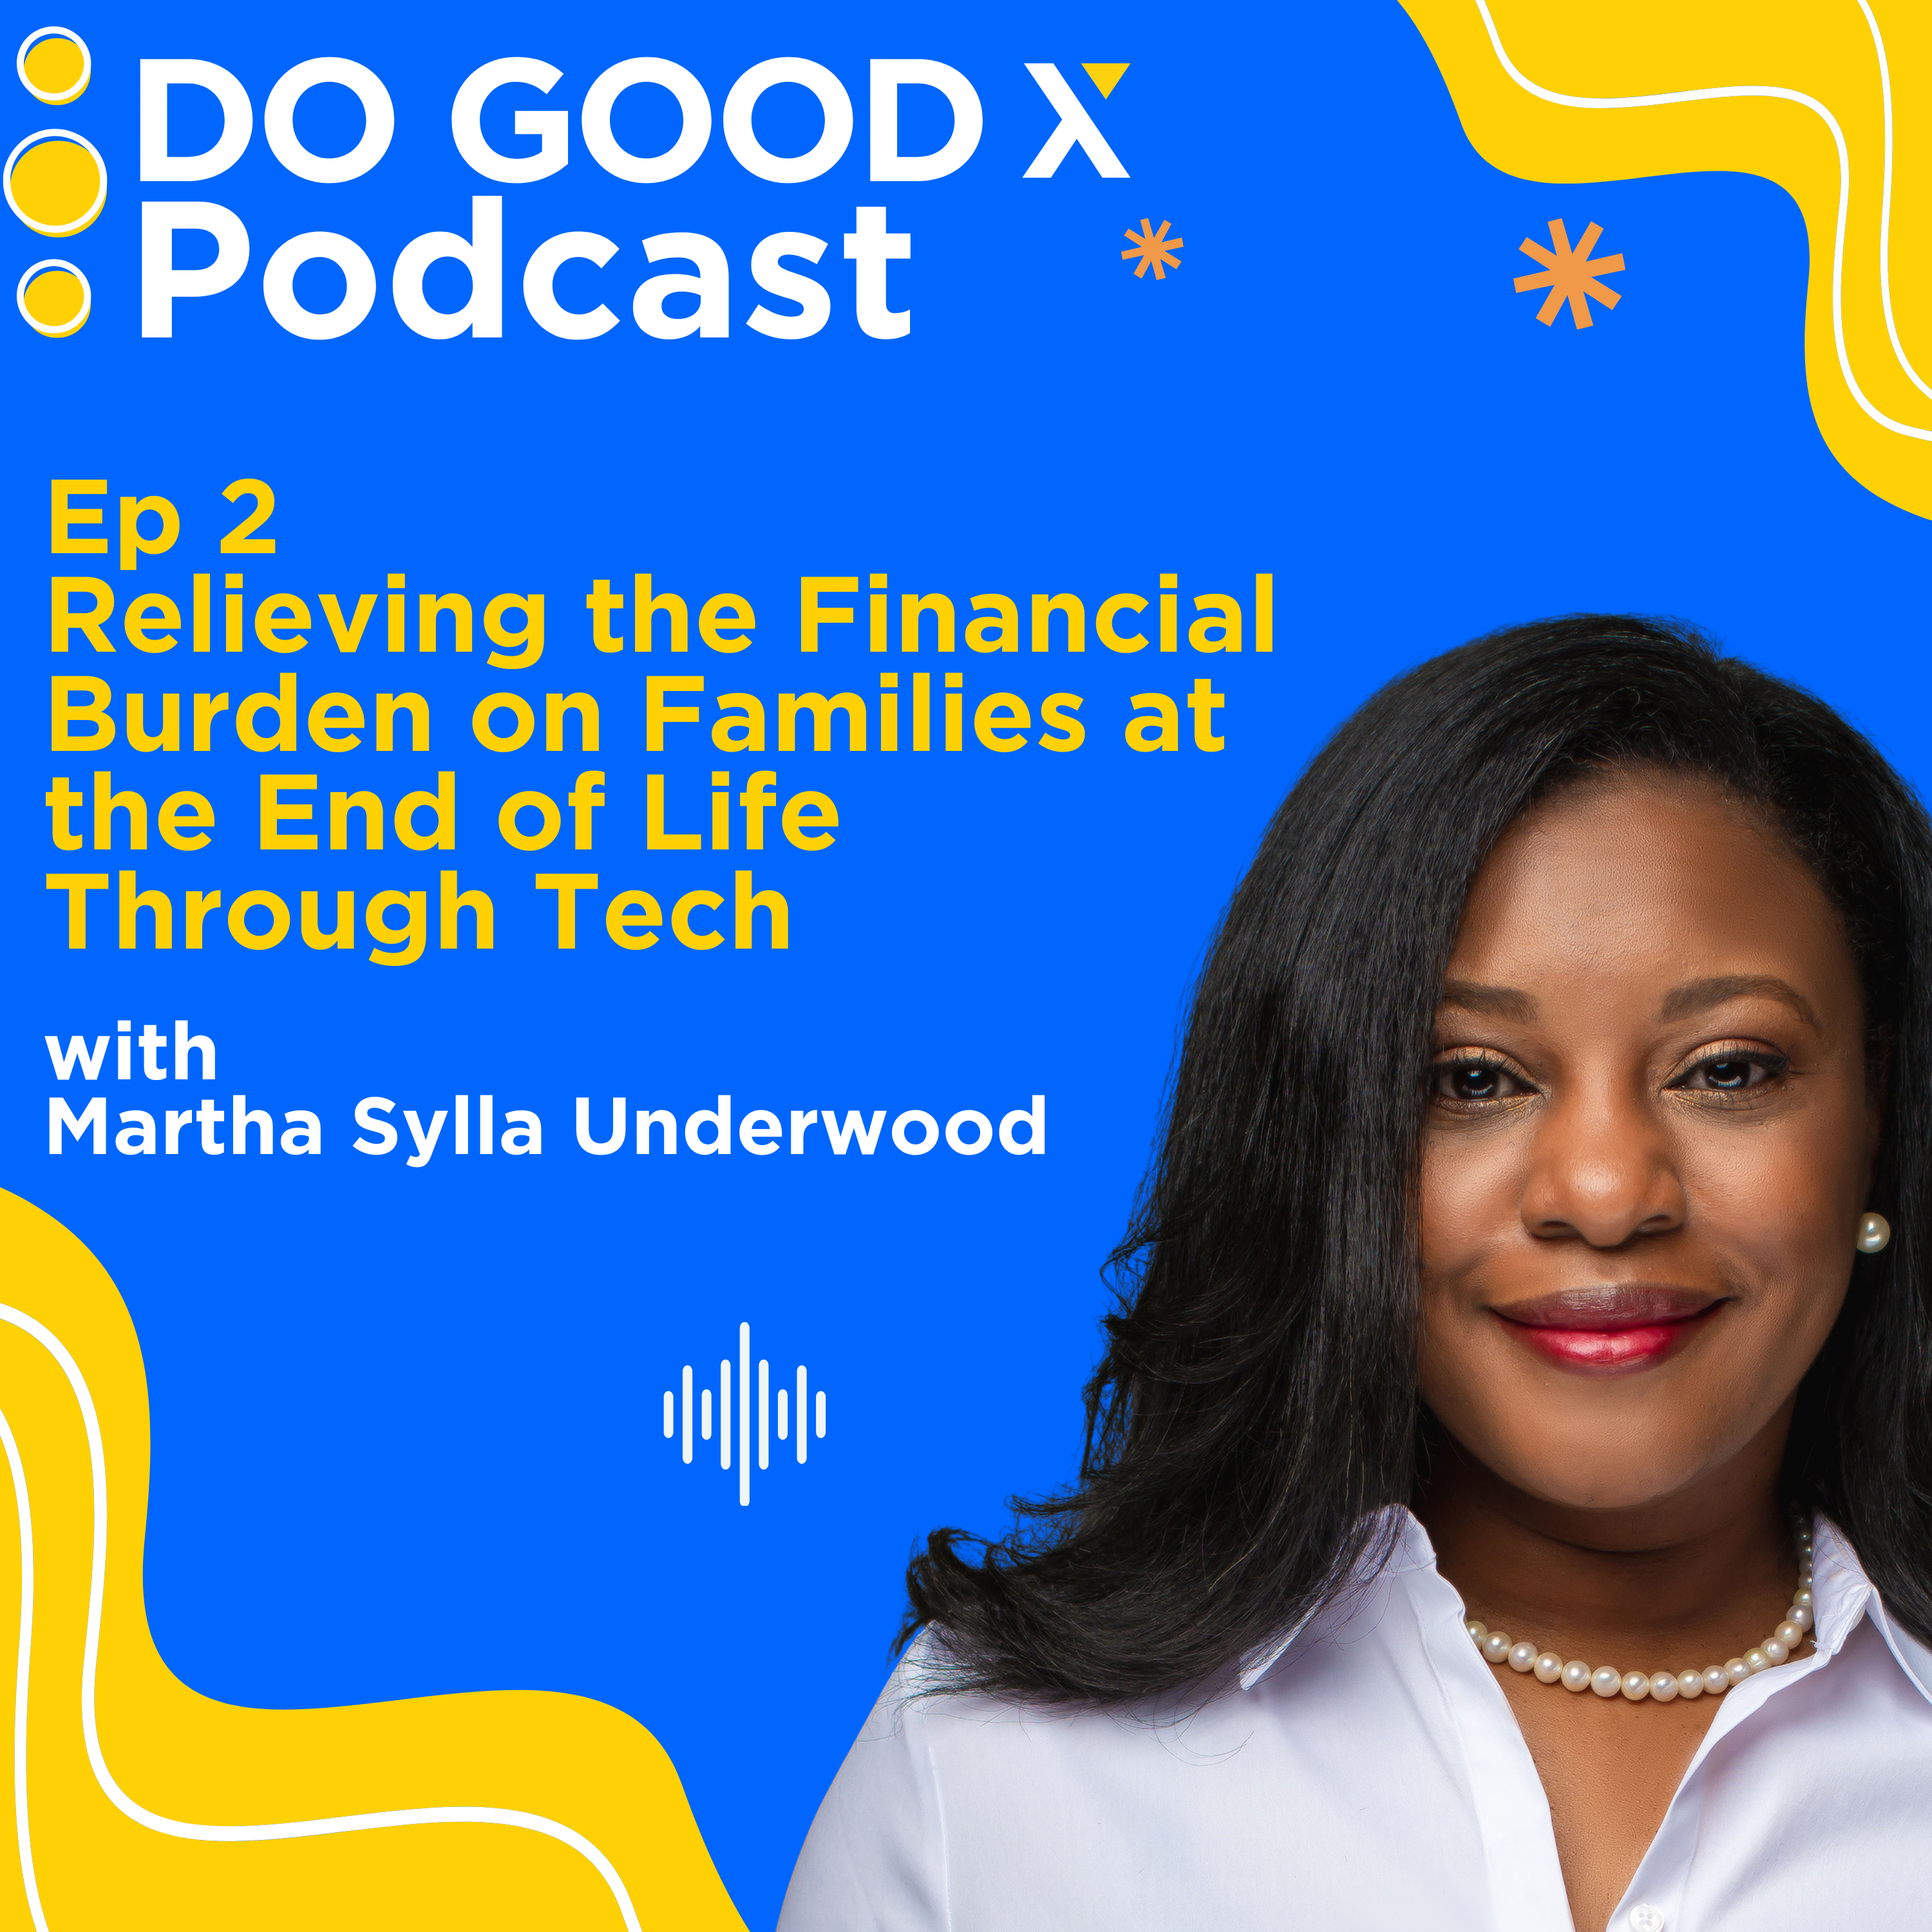 Ep 2 Relieving the Financial Burden on Families at the End of Life Through Tech with Martha Sylla Underwood